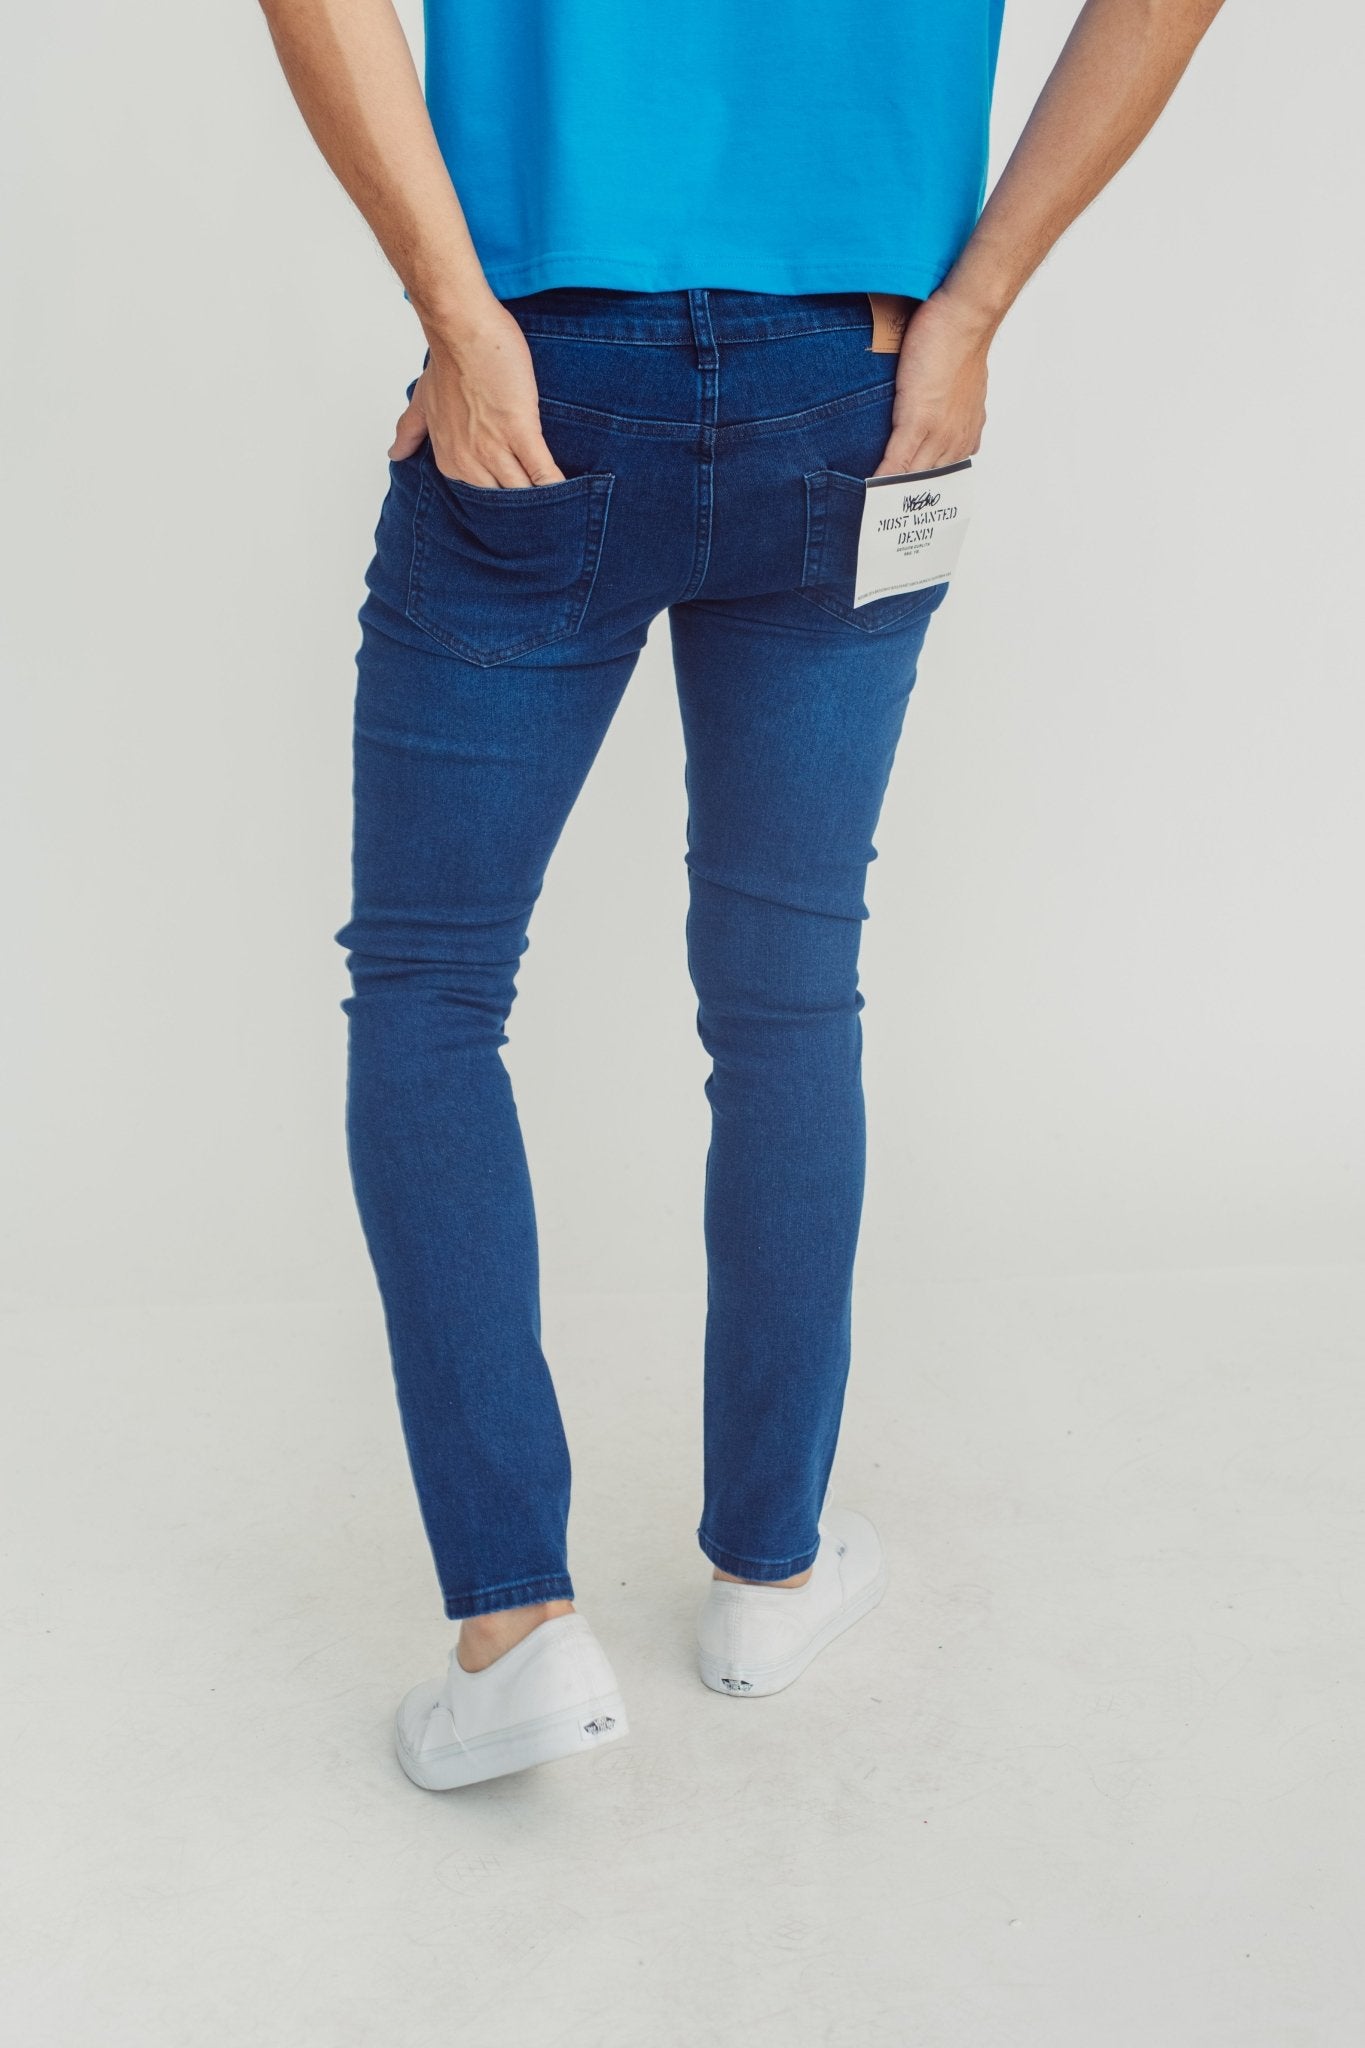 Blue Most Wanted Basic Five Pocket Skinny jeans - Mossimo PH